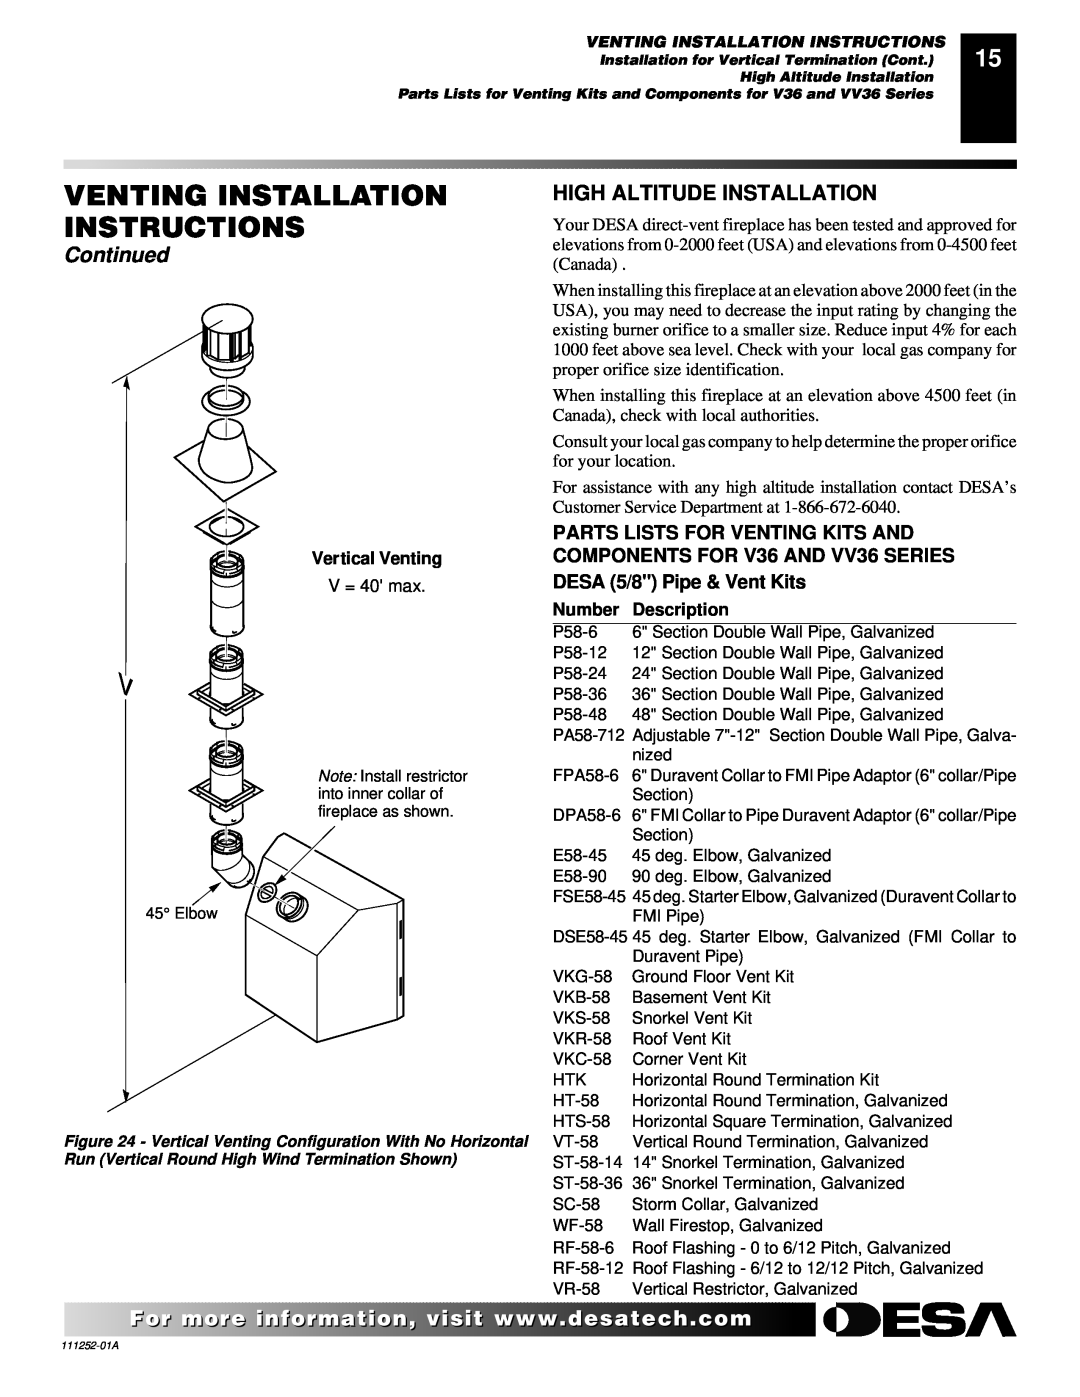 Desa CHDV36NRA High Altitude Installation, Venting Installation Instructions, Continued, Vertical Venting 